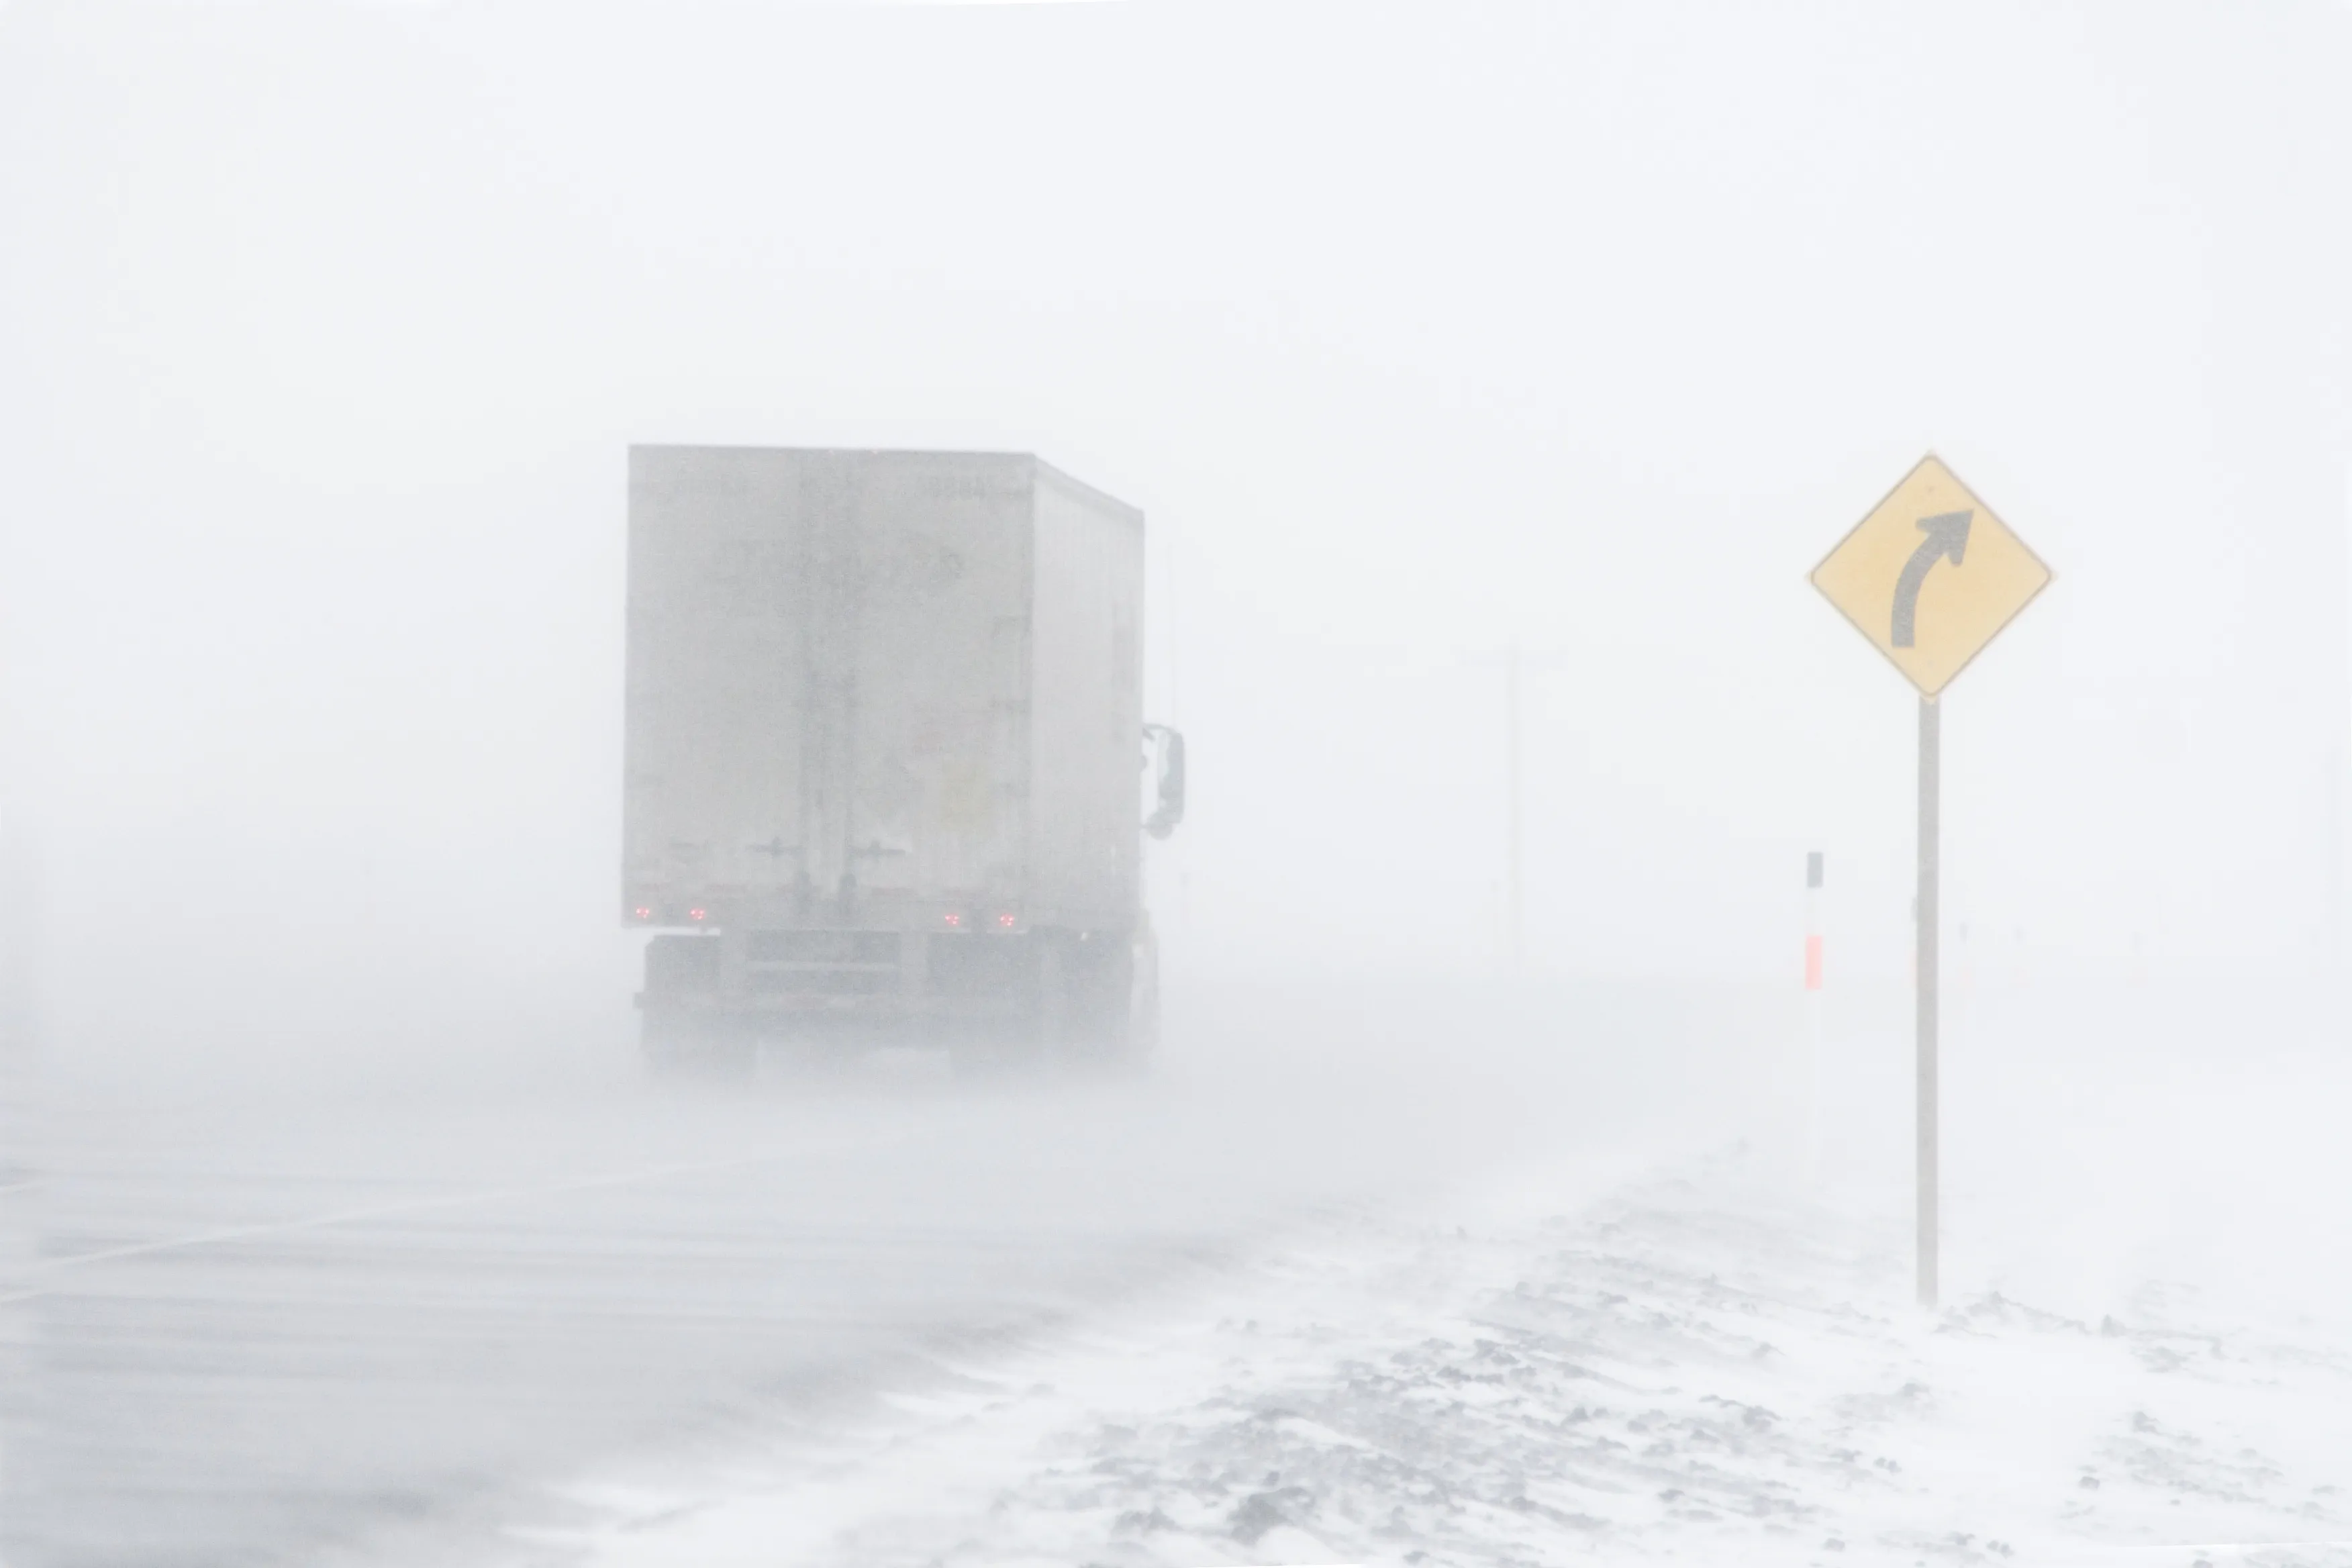 Semi truck on a snow-covered road